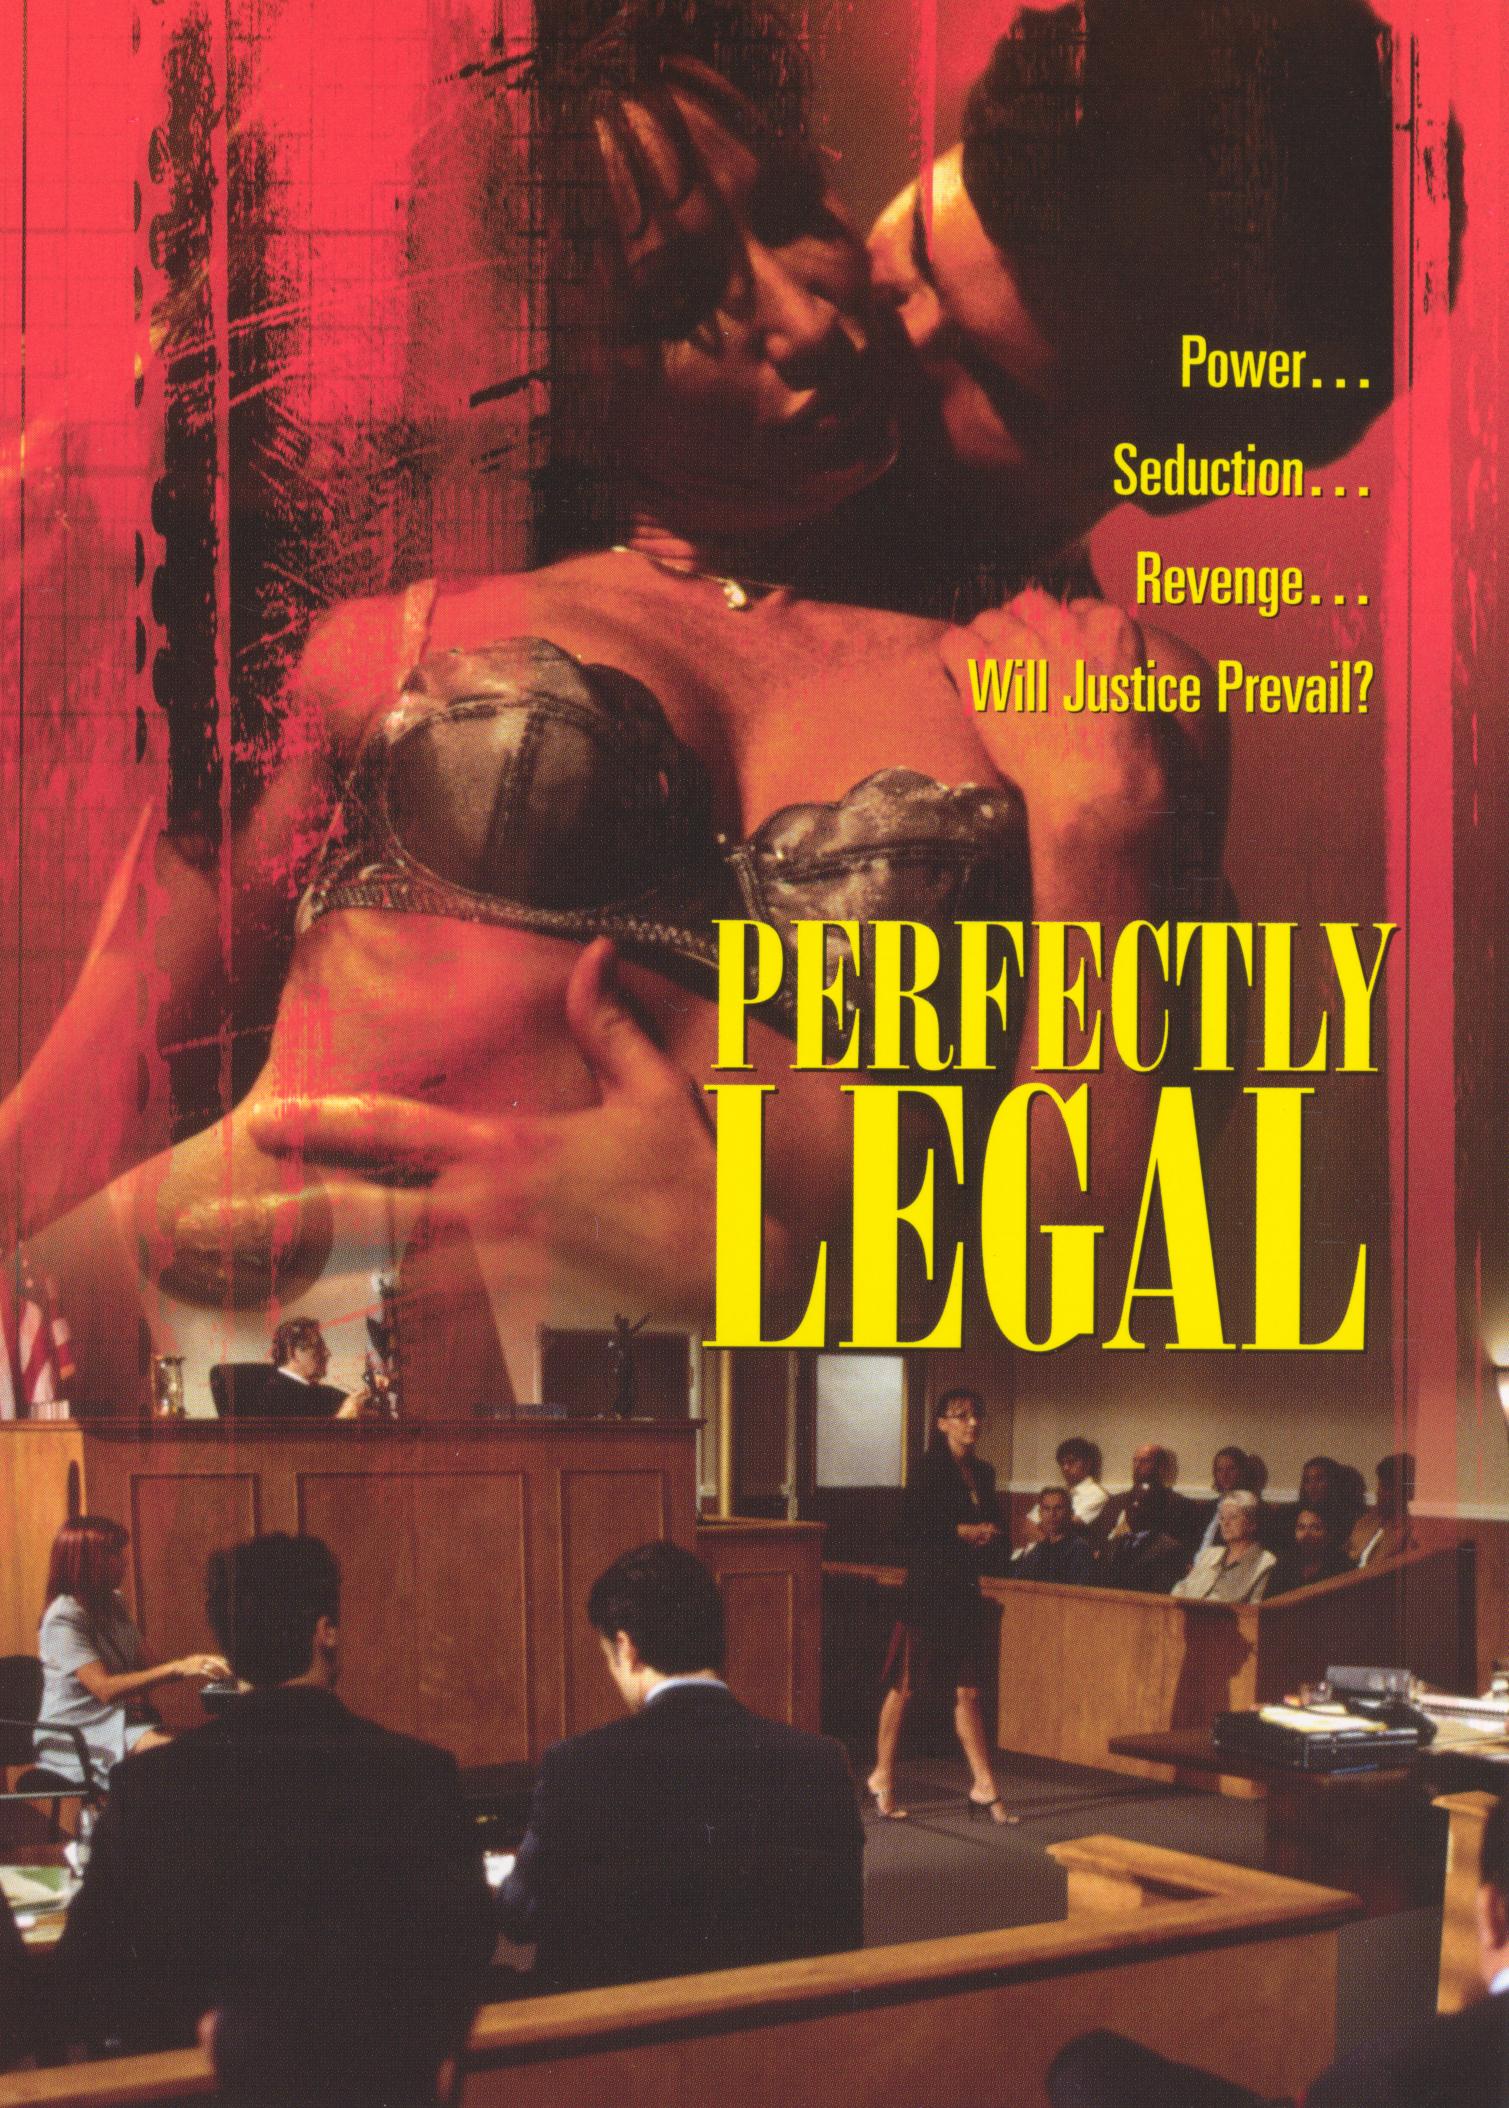 Perfectly Legal (2002) 720p HDRip English Adult Movie [900MB]